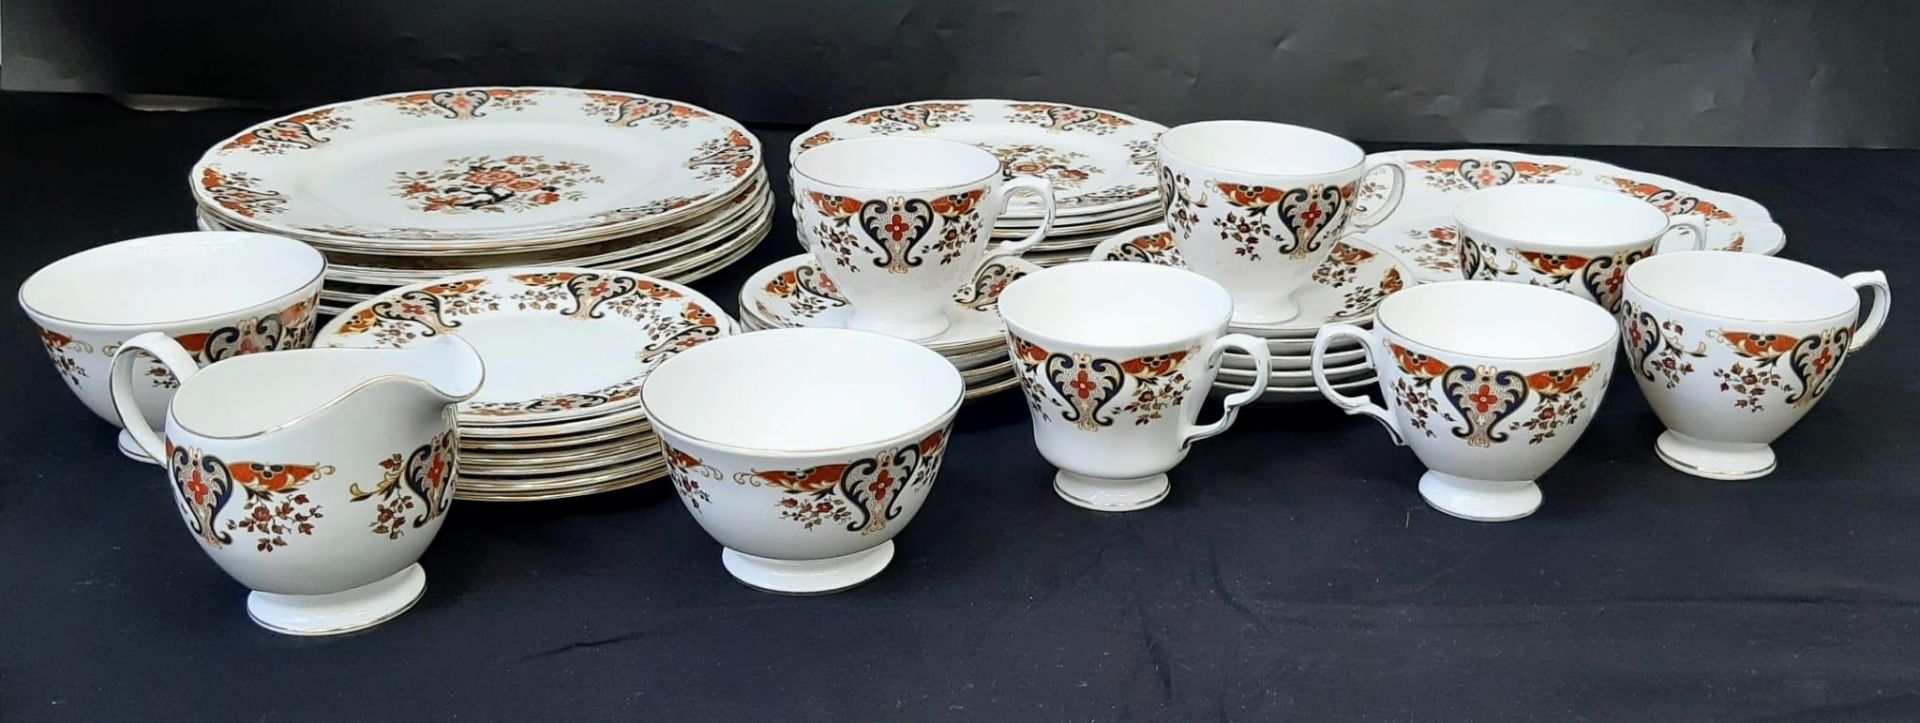 A Set of Vintage Dinner and Teaware Colclough Bone China. In good condition but please see photos.